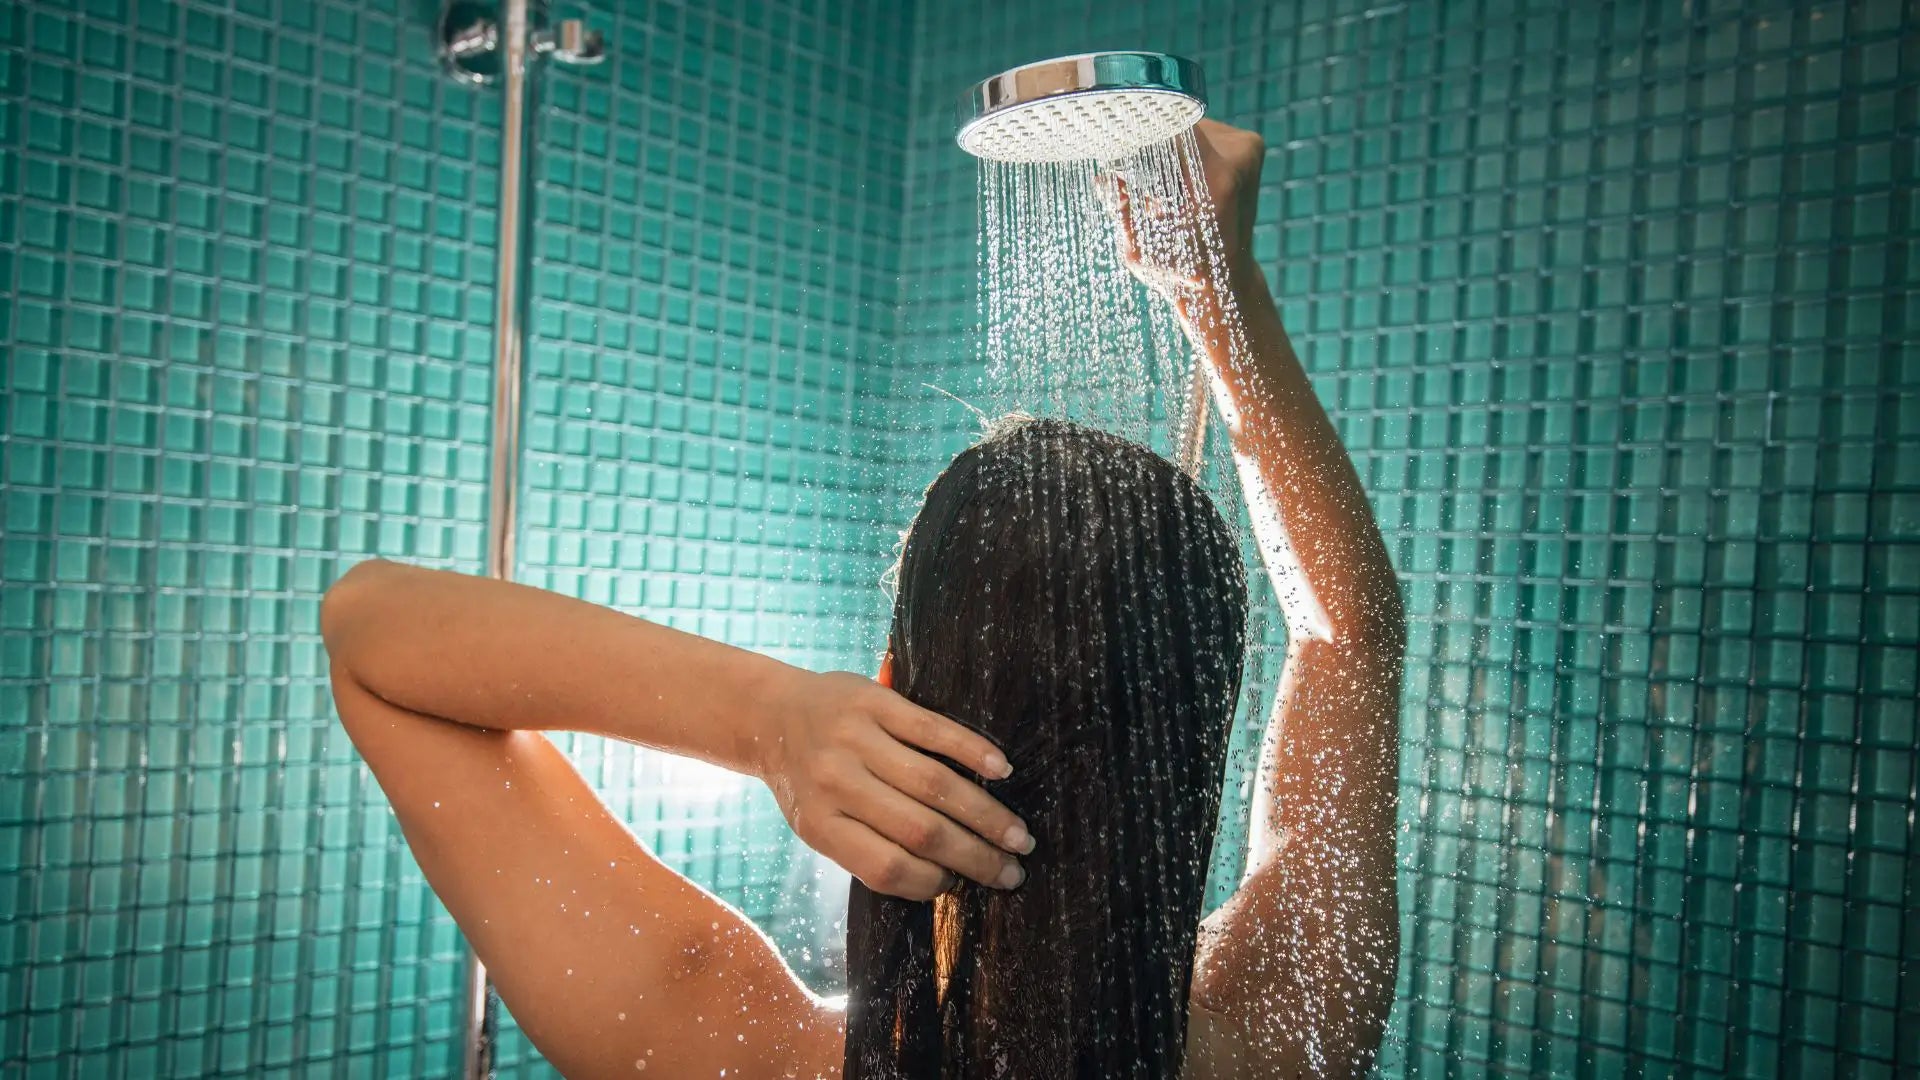 Woman in shower with green tiles